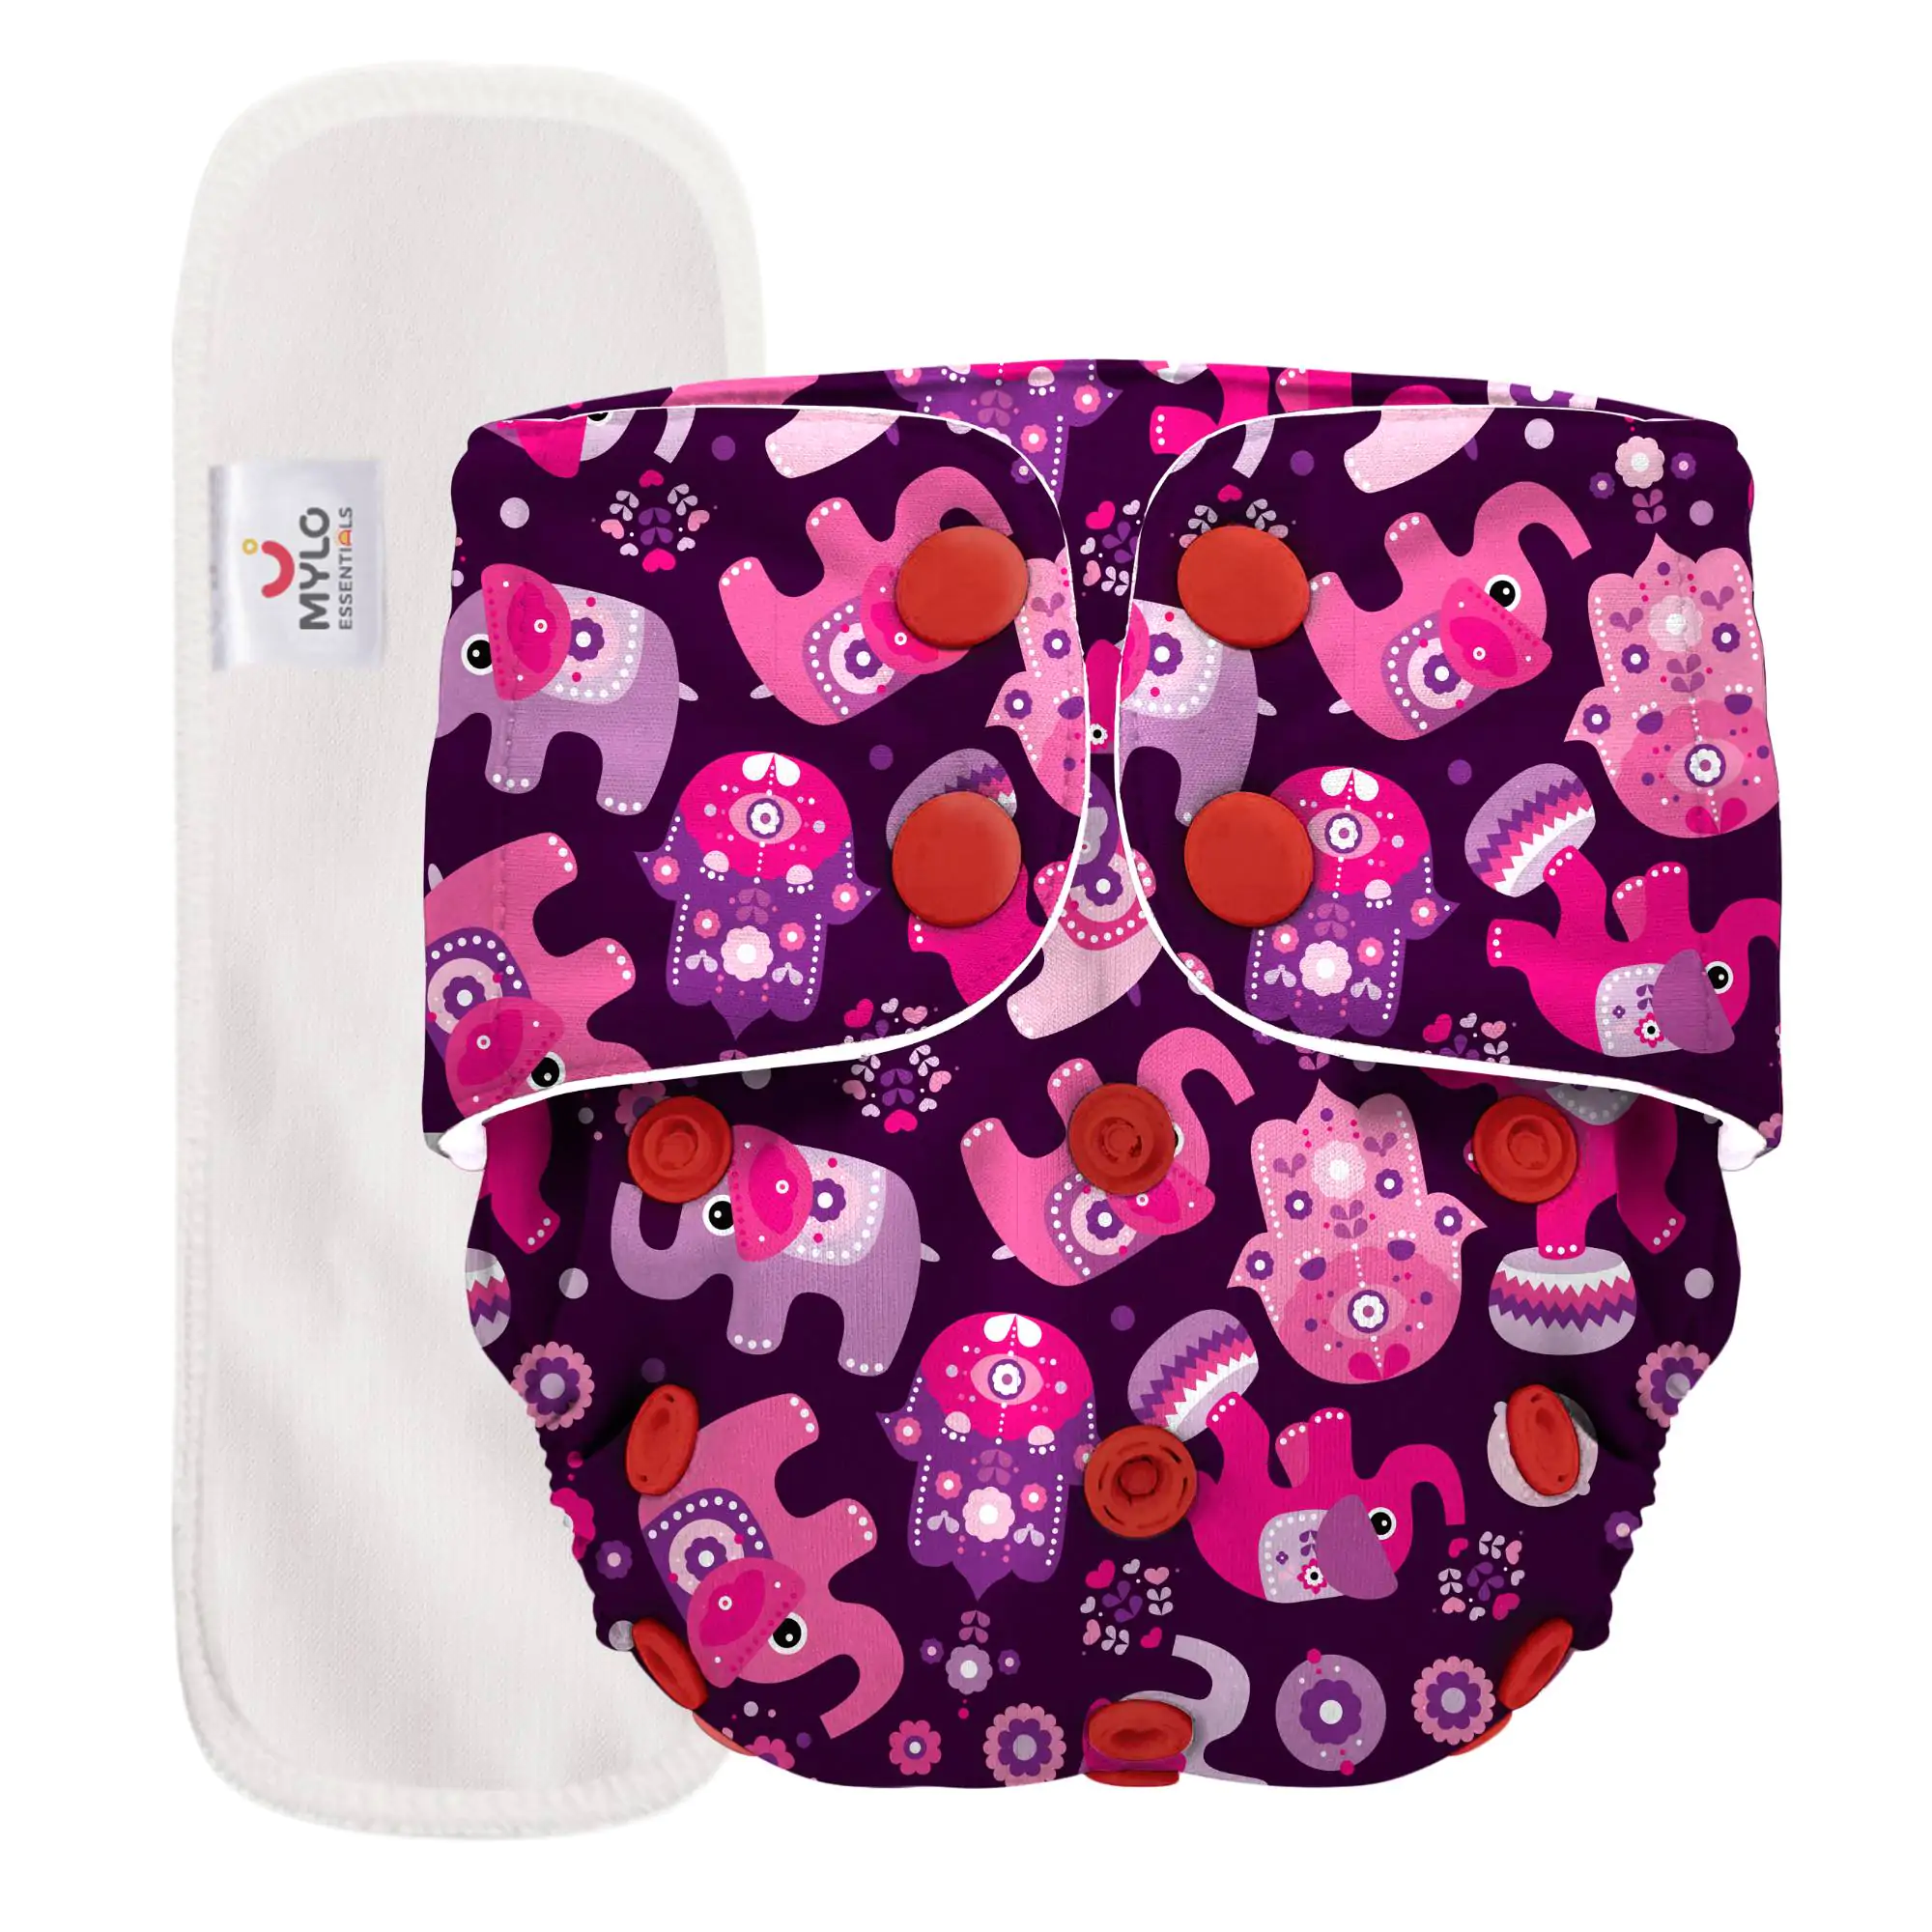 Mylo Adjustable Washable & Reusable Cloth Diaper With Dry Feel, Absorbent Insert Pad (3M-3Y)- Purple Love 